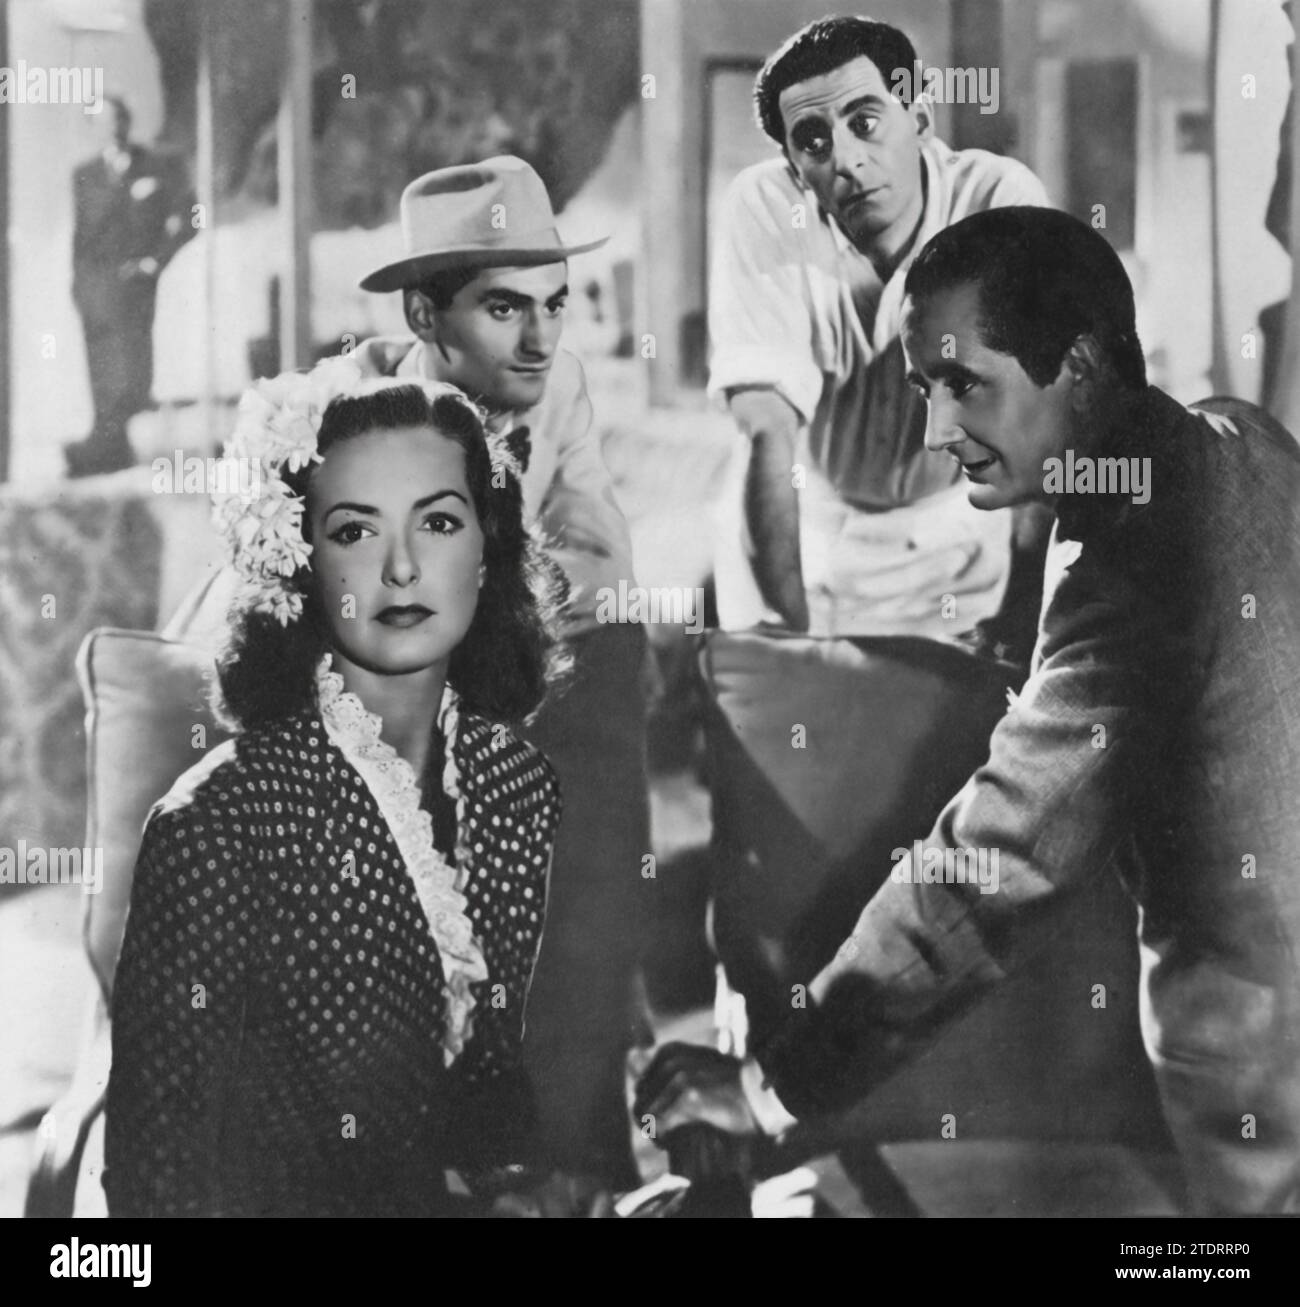 Patricia Roc, Bonar Colleano, Charles Goldner, and Nino Martini star in 'One Night with You' (1948), a musical romance. The film tells the story of an Italian singer, played by Martini, who finds himself entangled in a series of comedic mix-ups and romantic encounters in London, including with Roc's character. This charming and light-hearted film showcases the talents of its cast, blending music, humor, and romance in a delightful post-war cinematic experience. Stock Photo